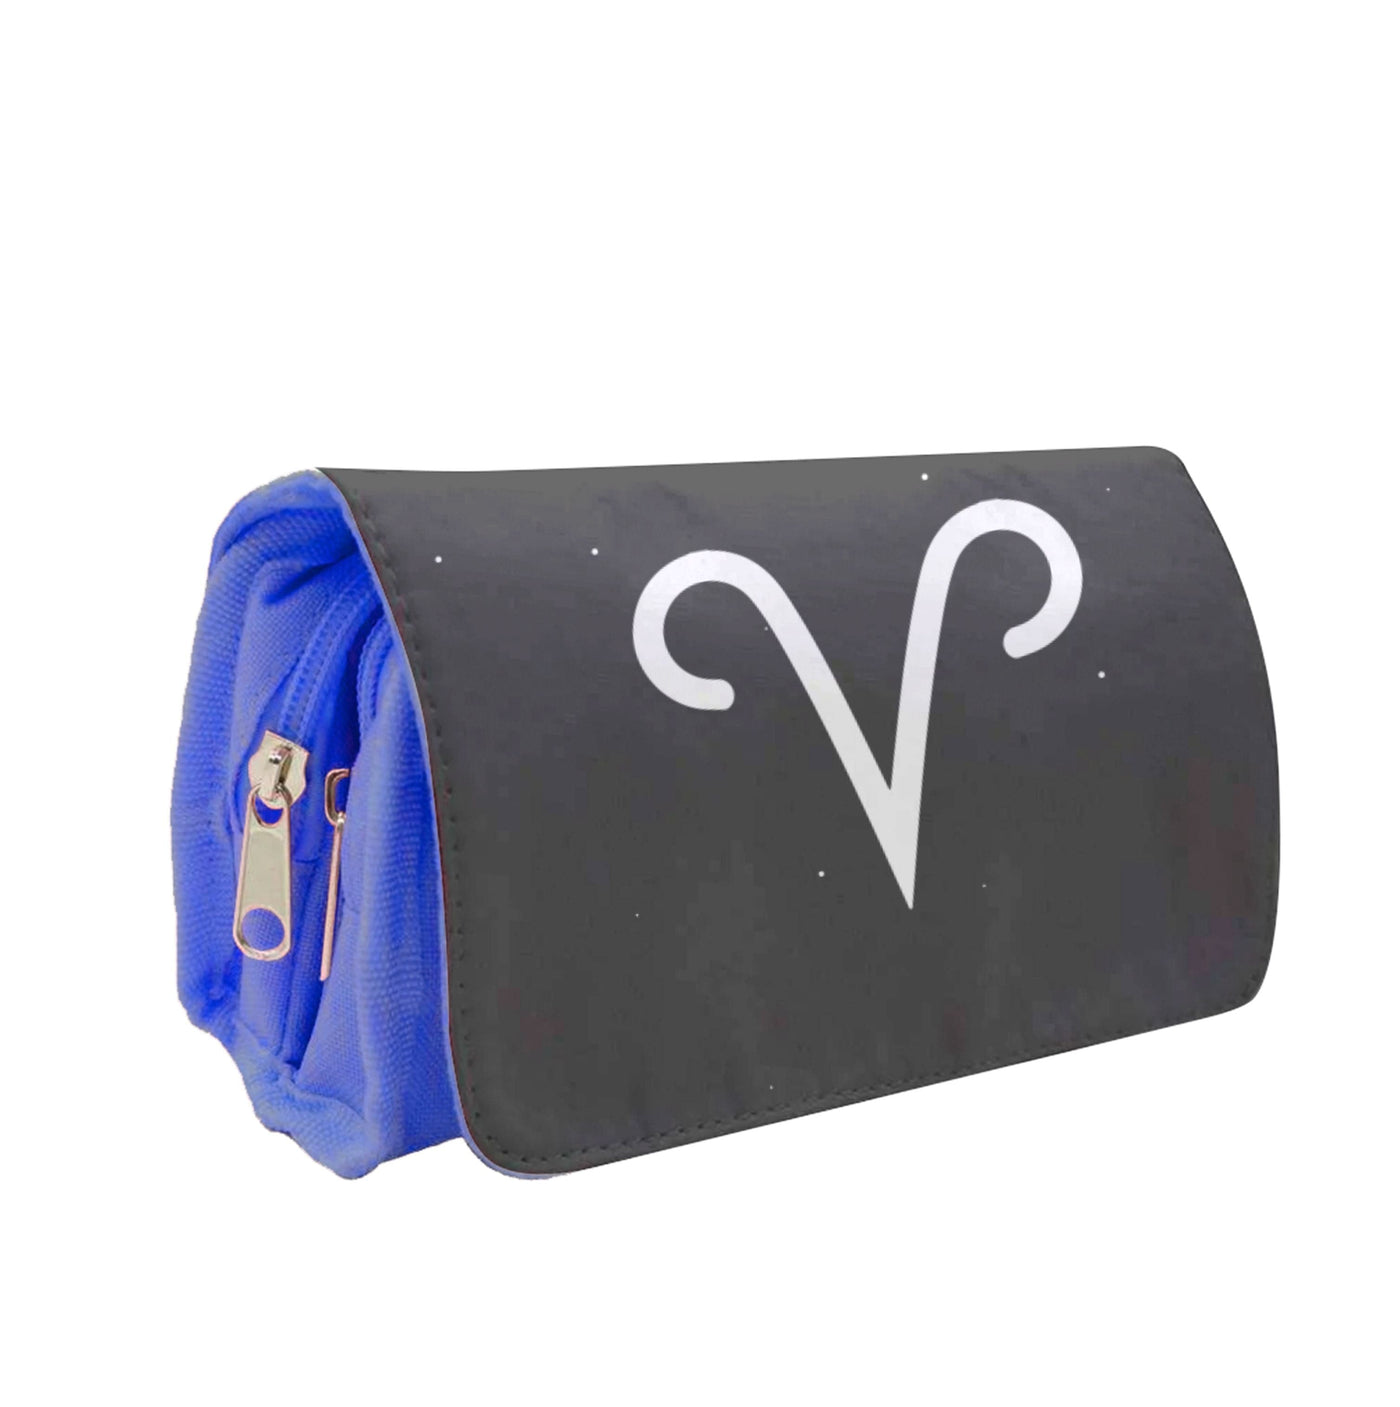 Aries - Astrology  Pencil Case